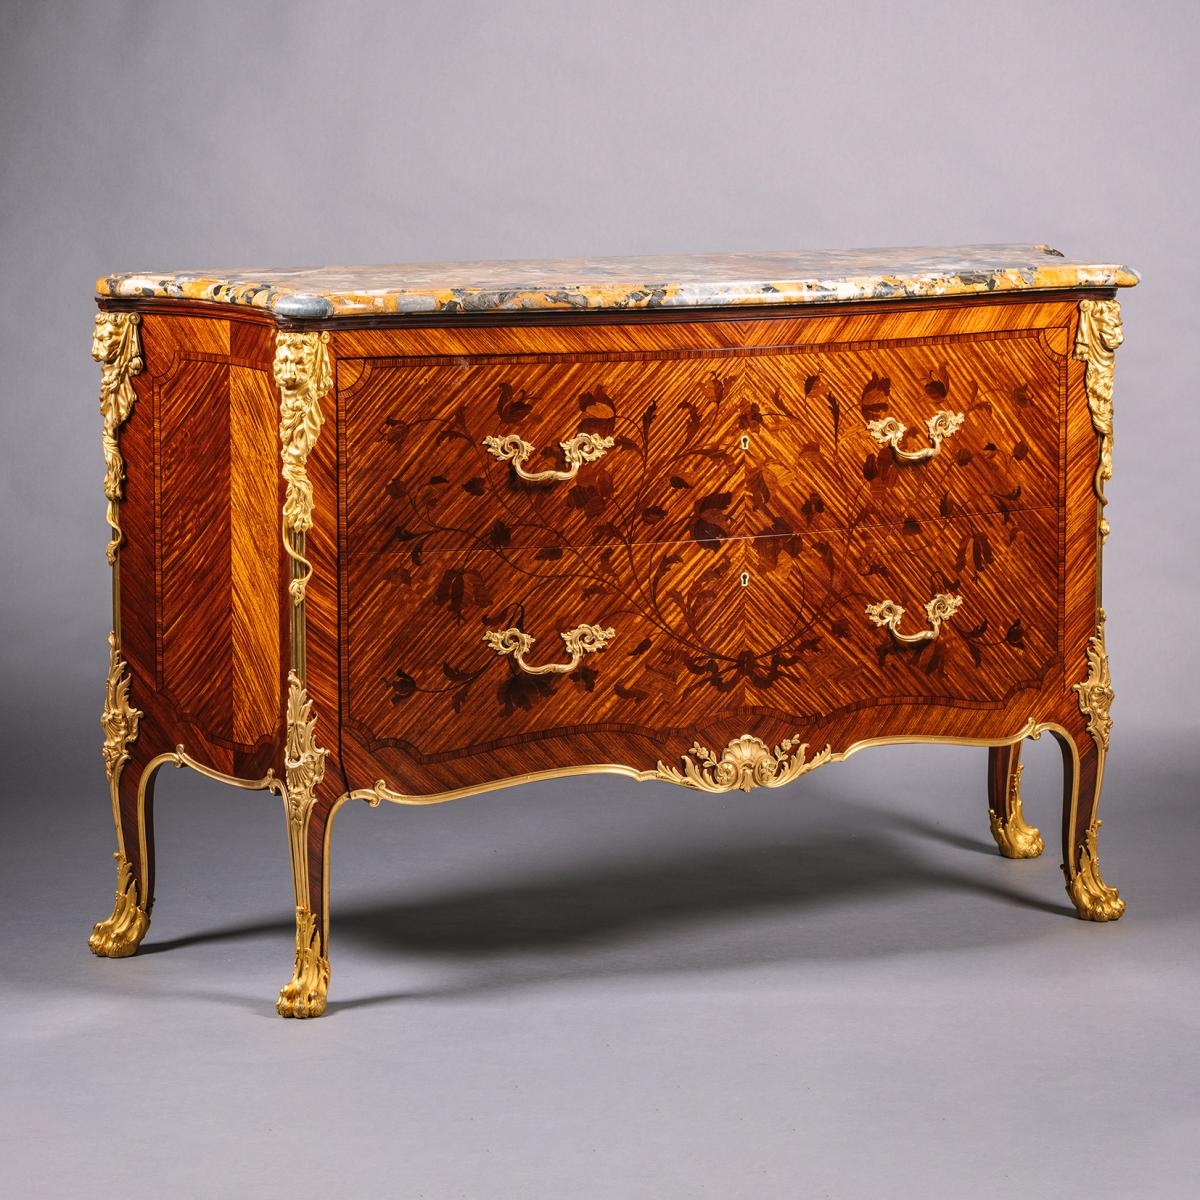 A Fine Gilt-Bronze Mounted Marquetry Commode, By Heinrich Pallenberg